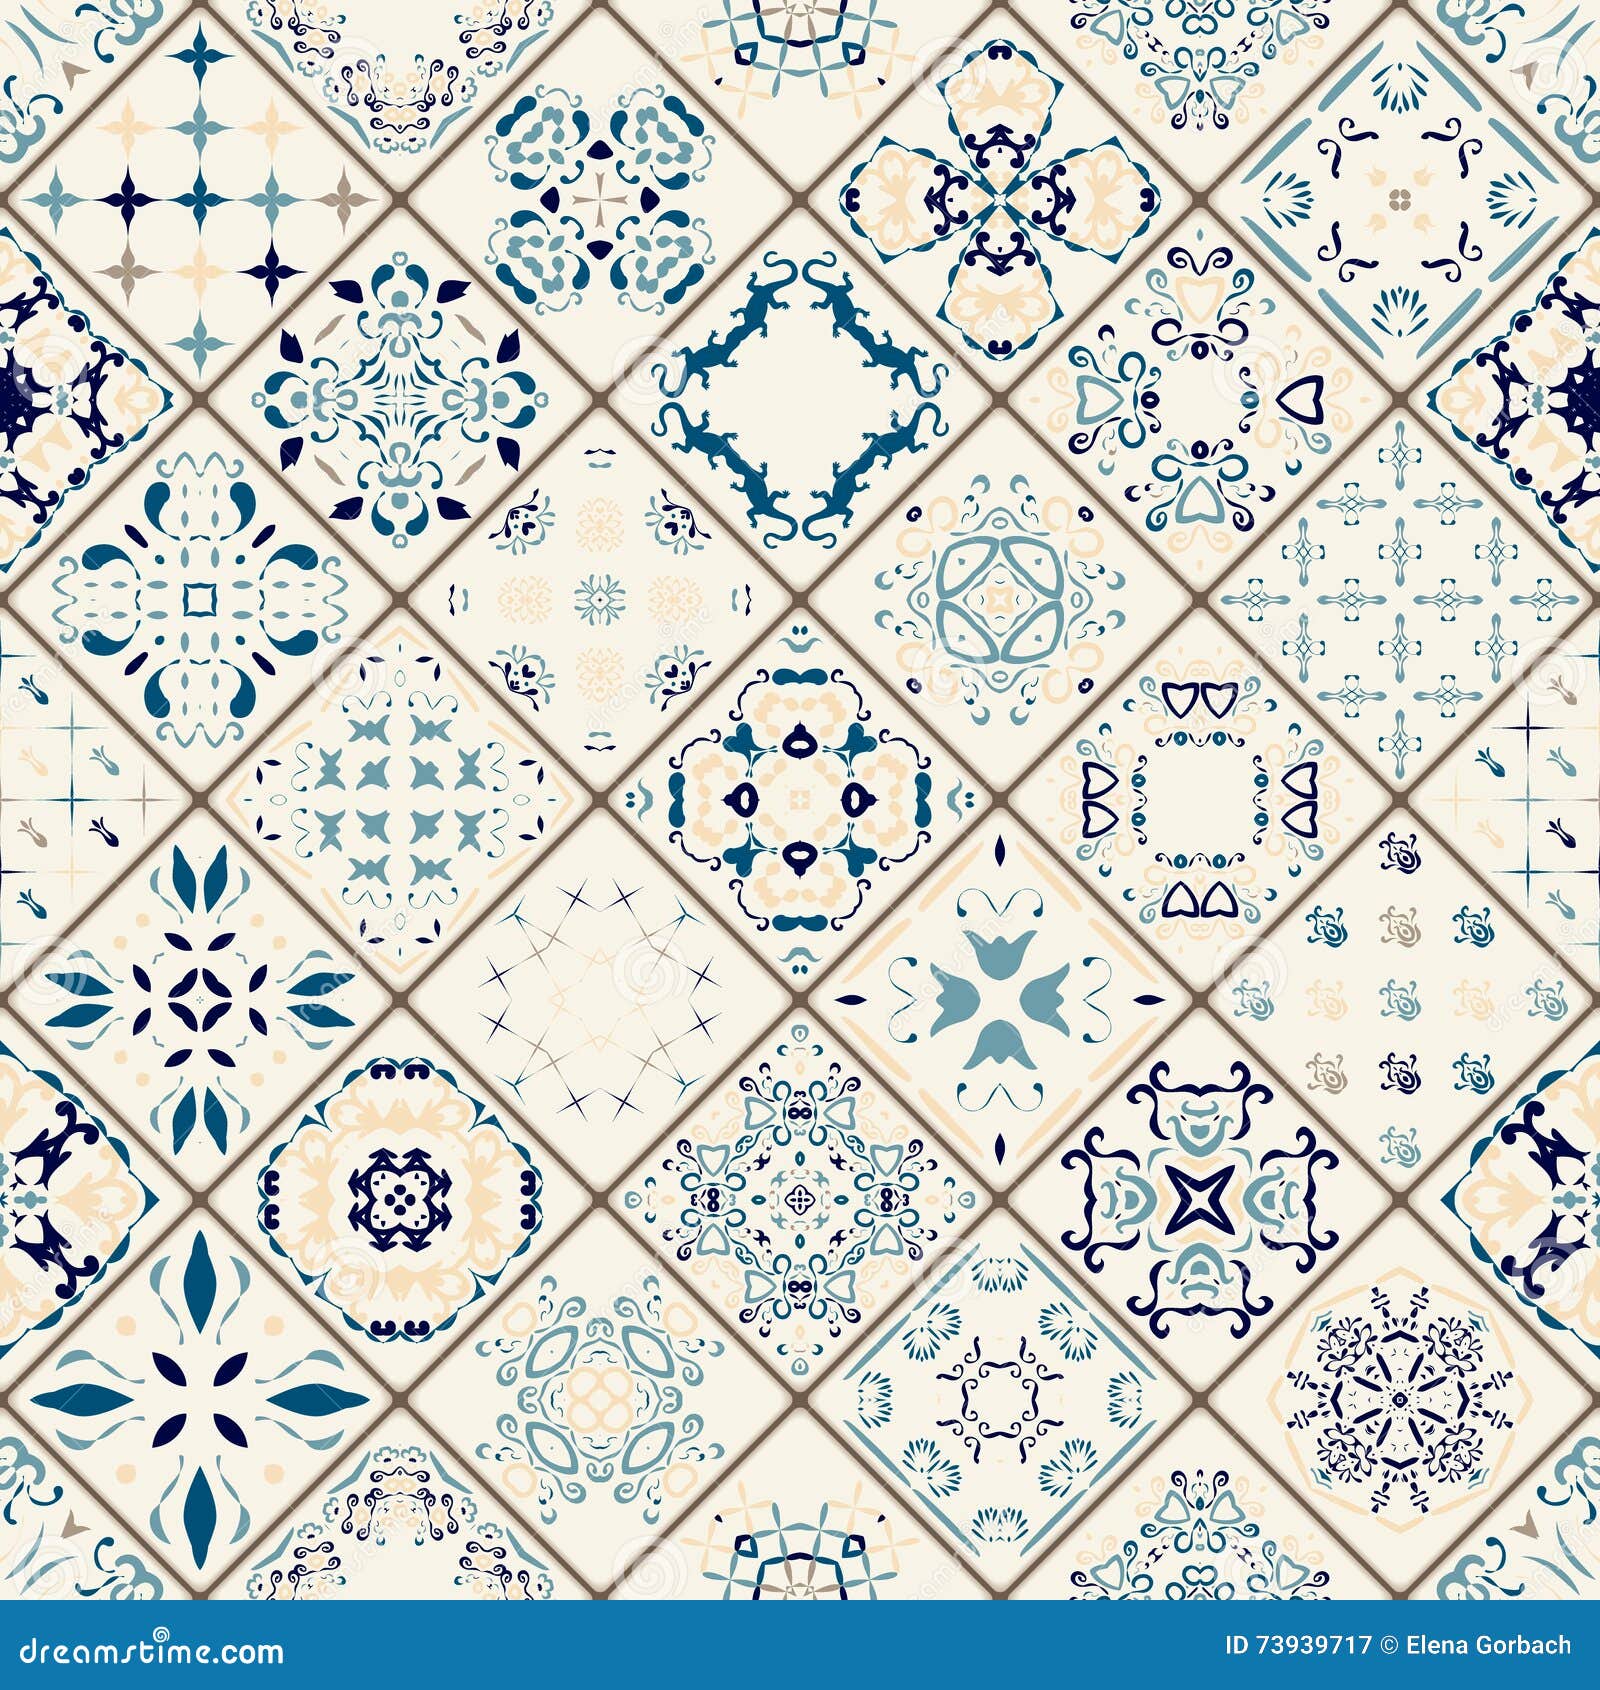 mega gorgeous seamless patchwork pattern from colorful moroccan tiles, ornaments.